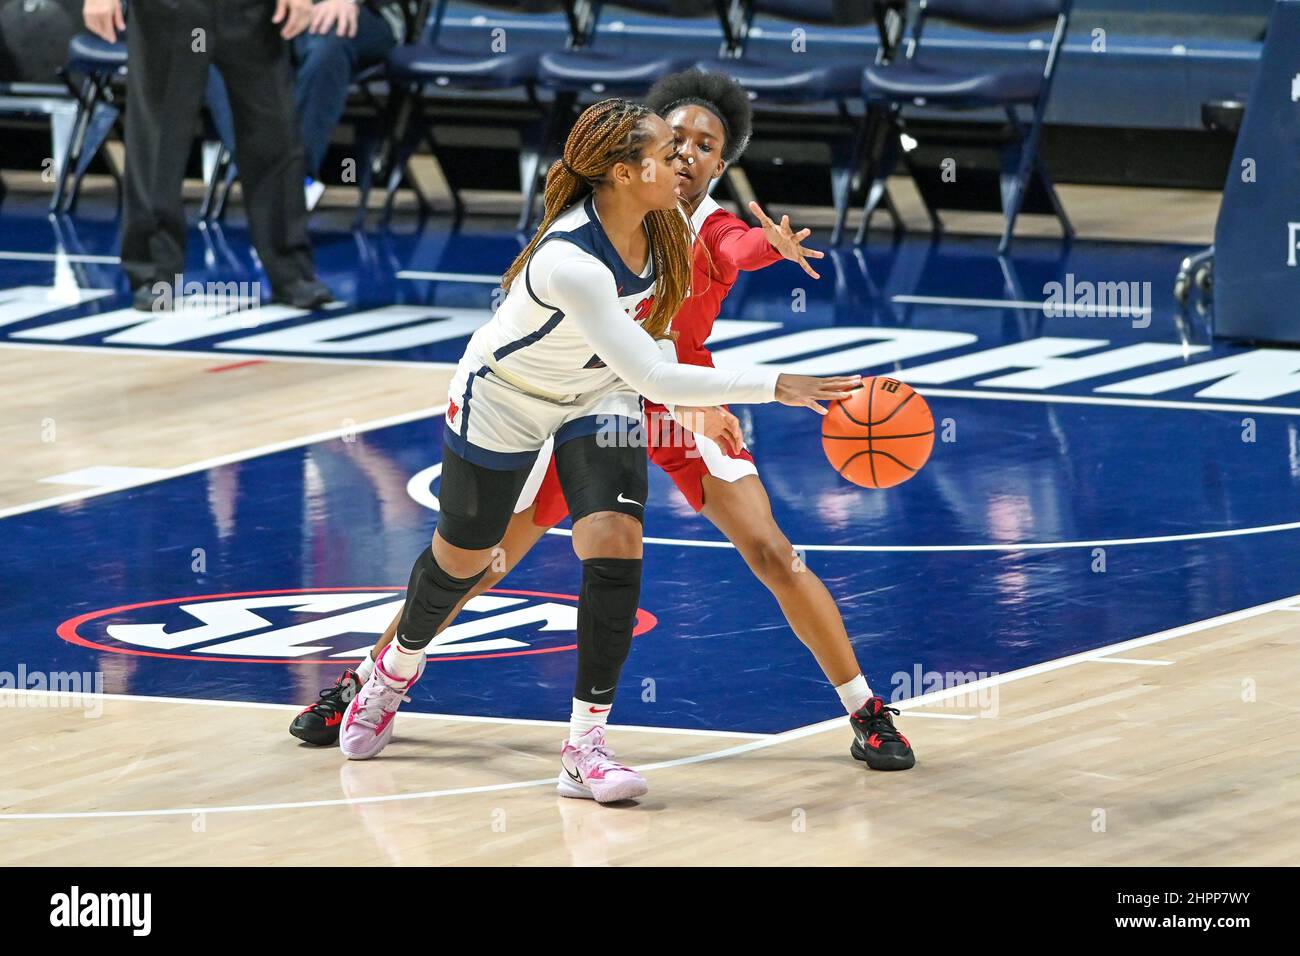 Oxford, MS, USA. 22nd Feb, 2022. Ole' Miss guard Mimi Reid (2) looks for an opening against Arkansas guard Samara Spencer (2) during the college basketball game between the Arkansas Razorbacks and the Ole' Miss Rebels on February 22, 2022 at the SJB Pavilion in Oxford, MS. (Photo by: Kevin Langley/CSM). Credit: csm/Alamy Live News Stock Photo